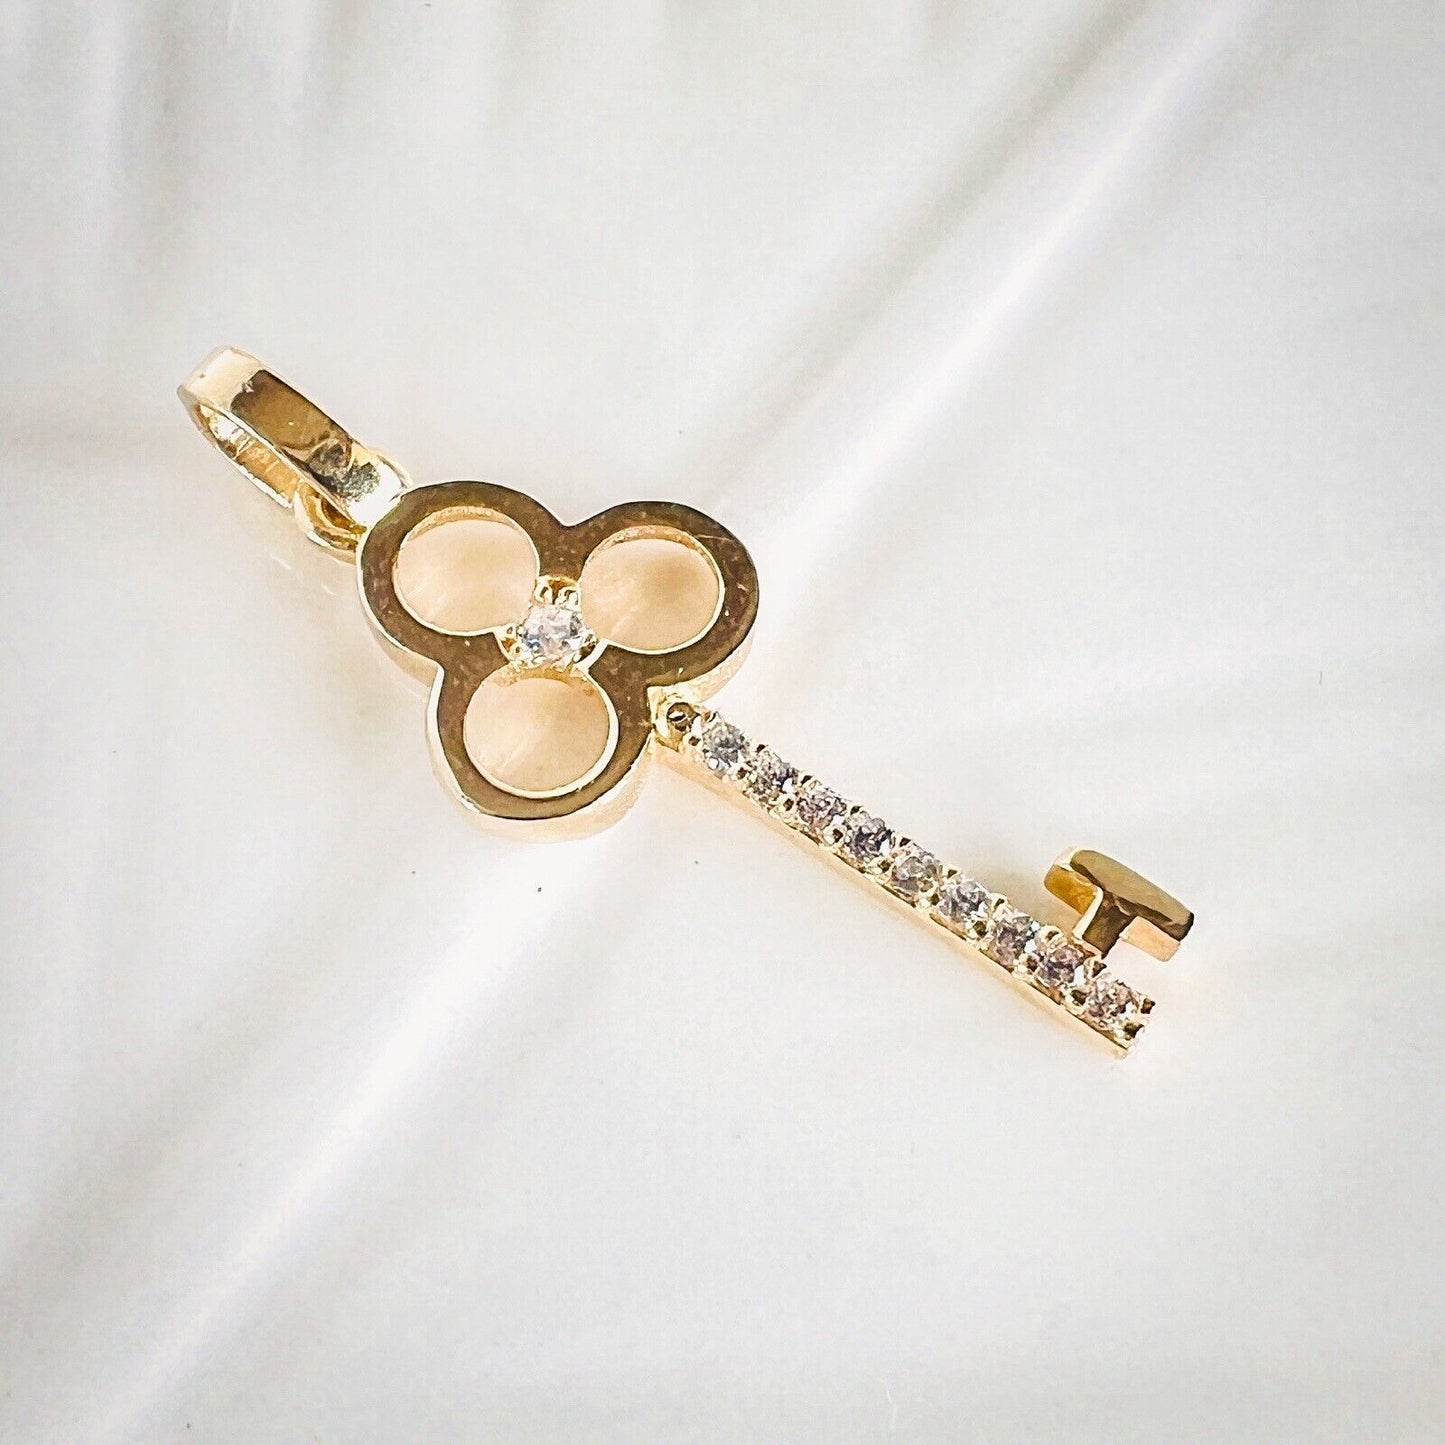 Solid 14K Yellow Gold Key to Your Heart CZ Charm/Pendant, New